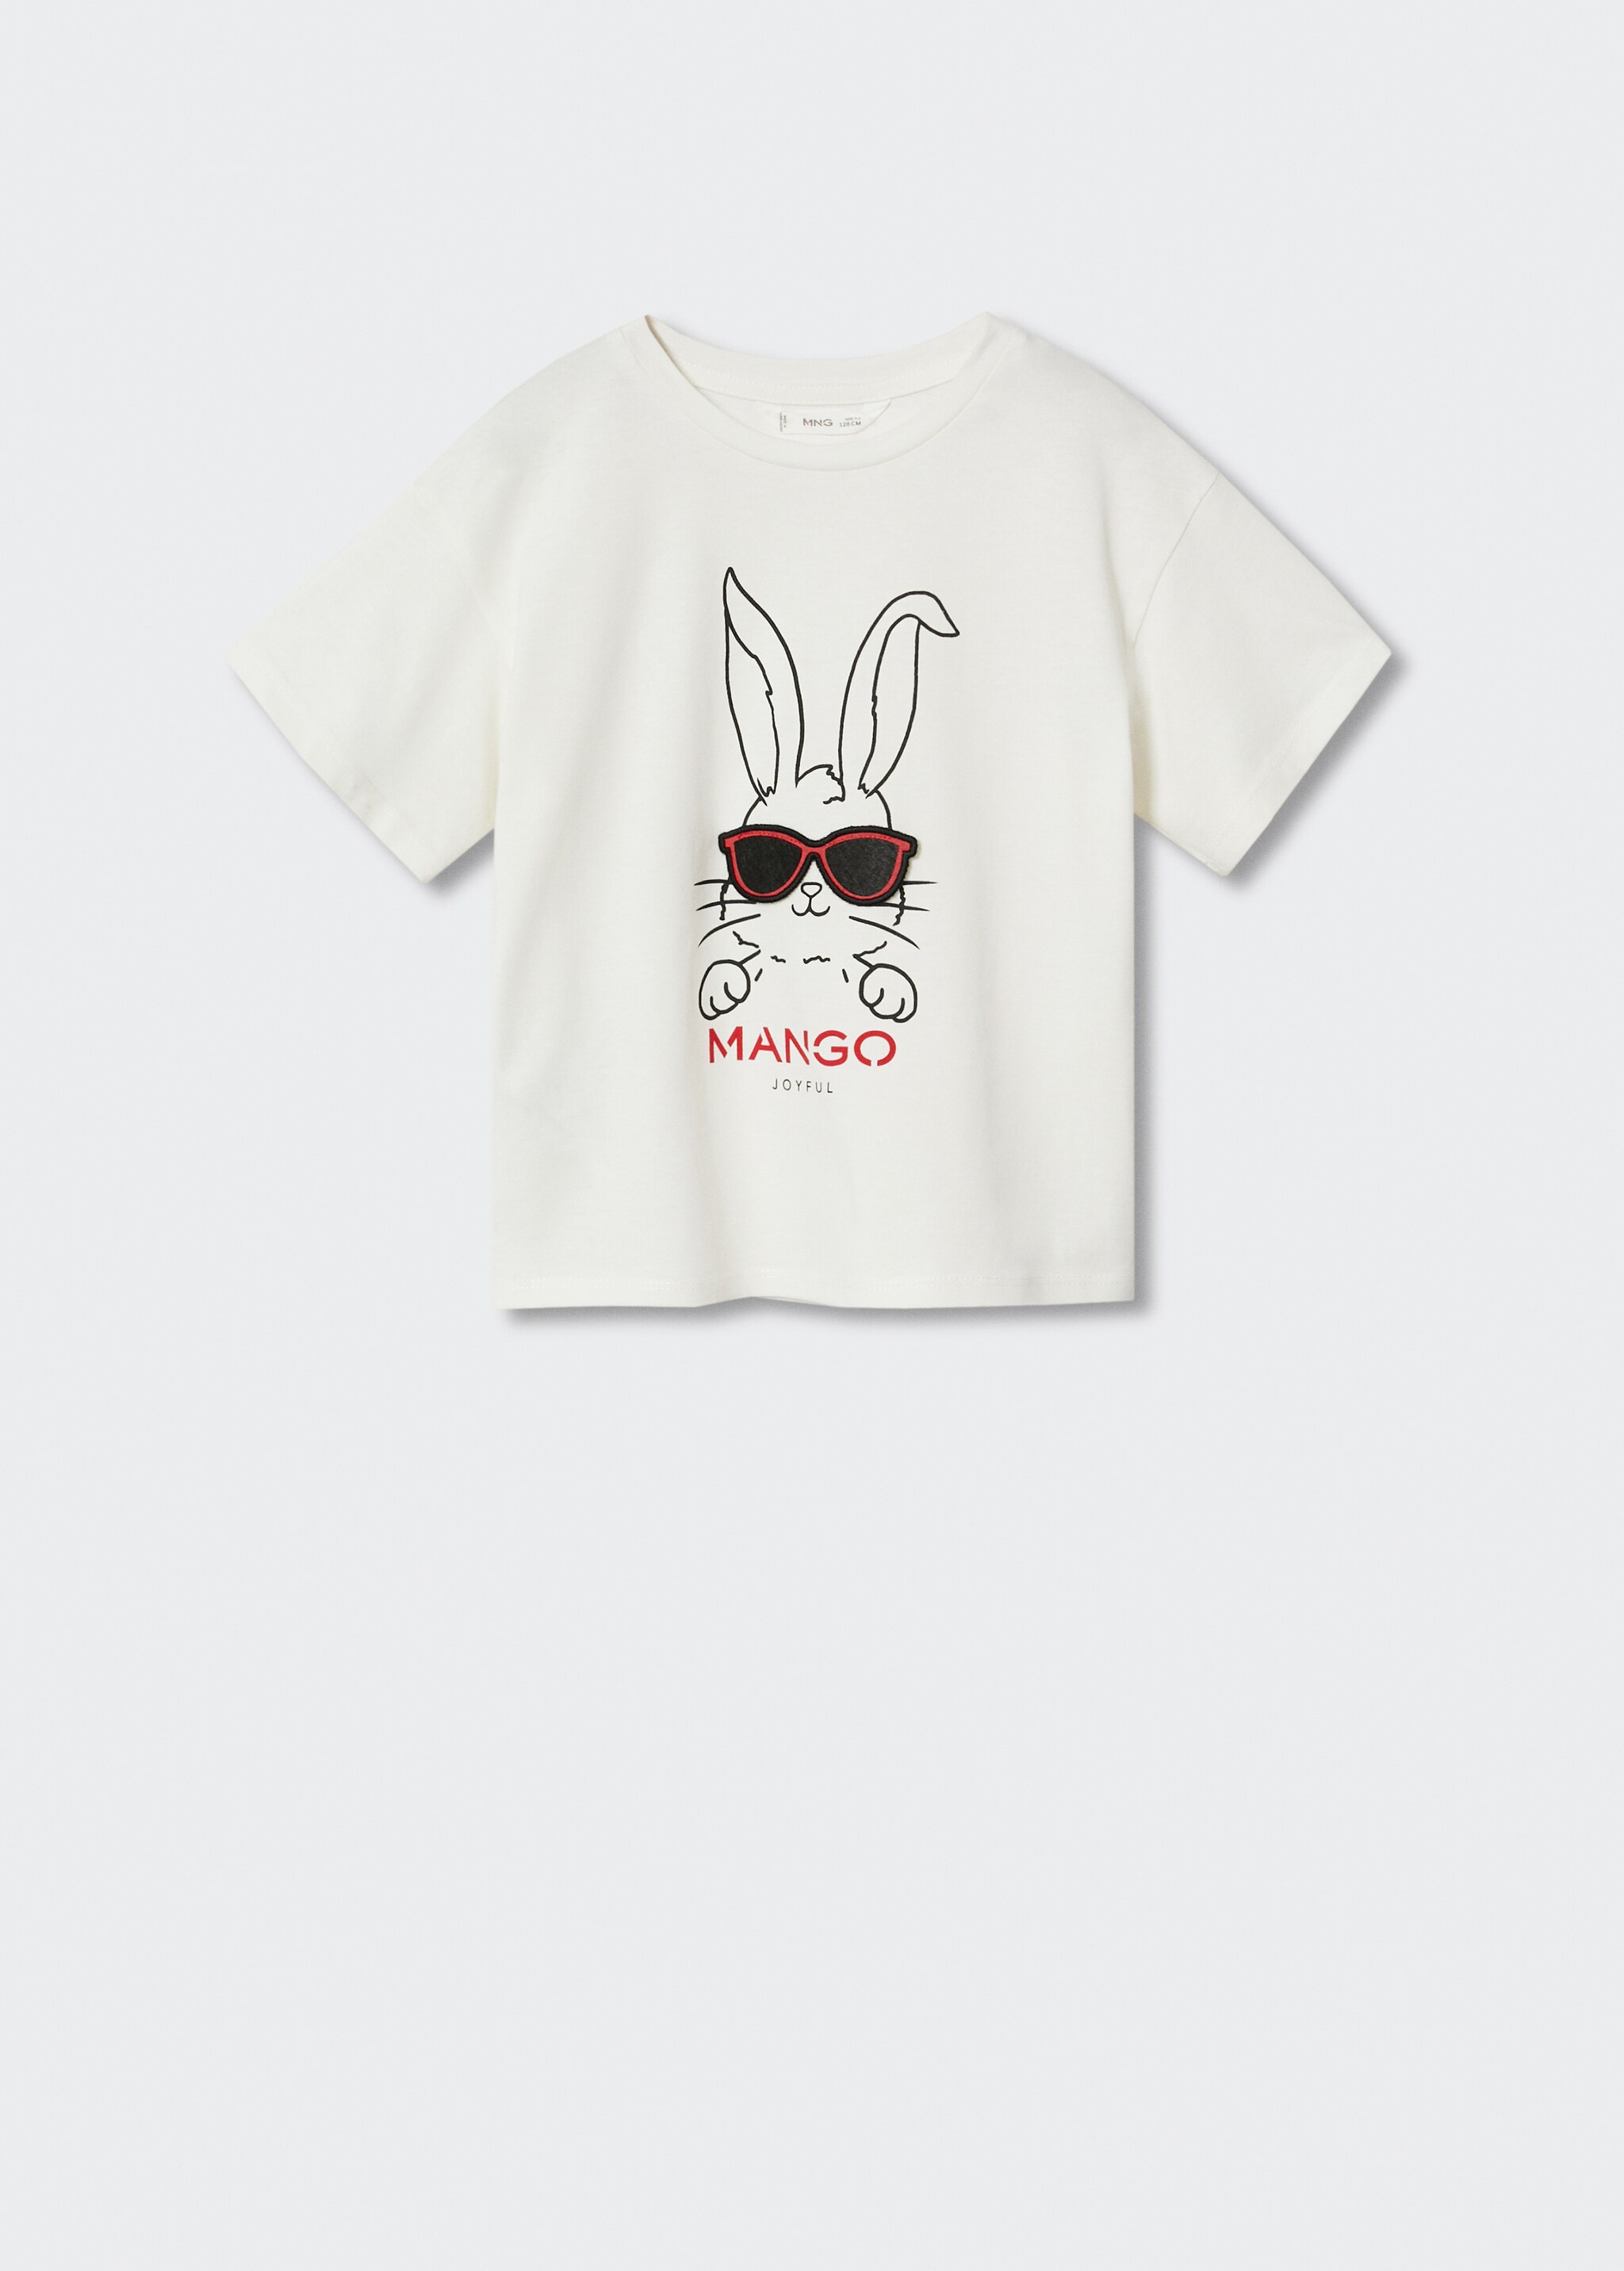 Bugs Bunny t-shirt - Article without model